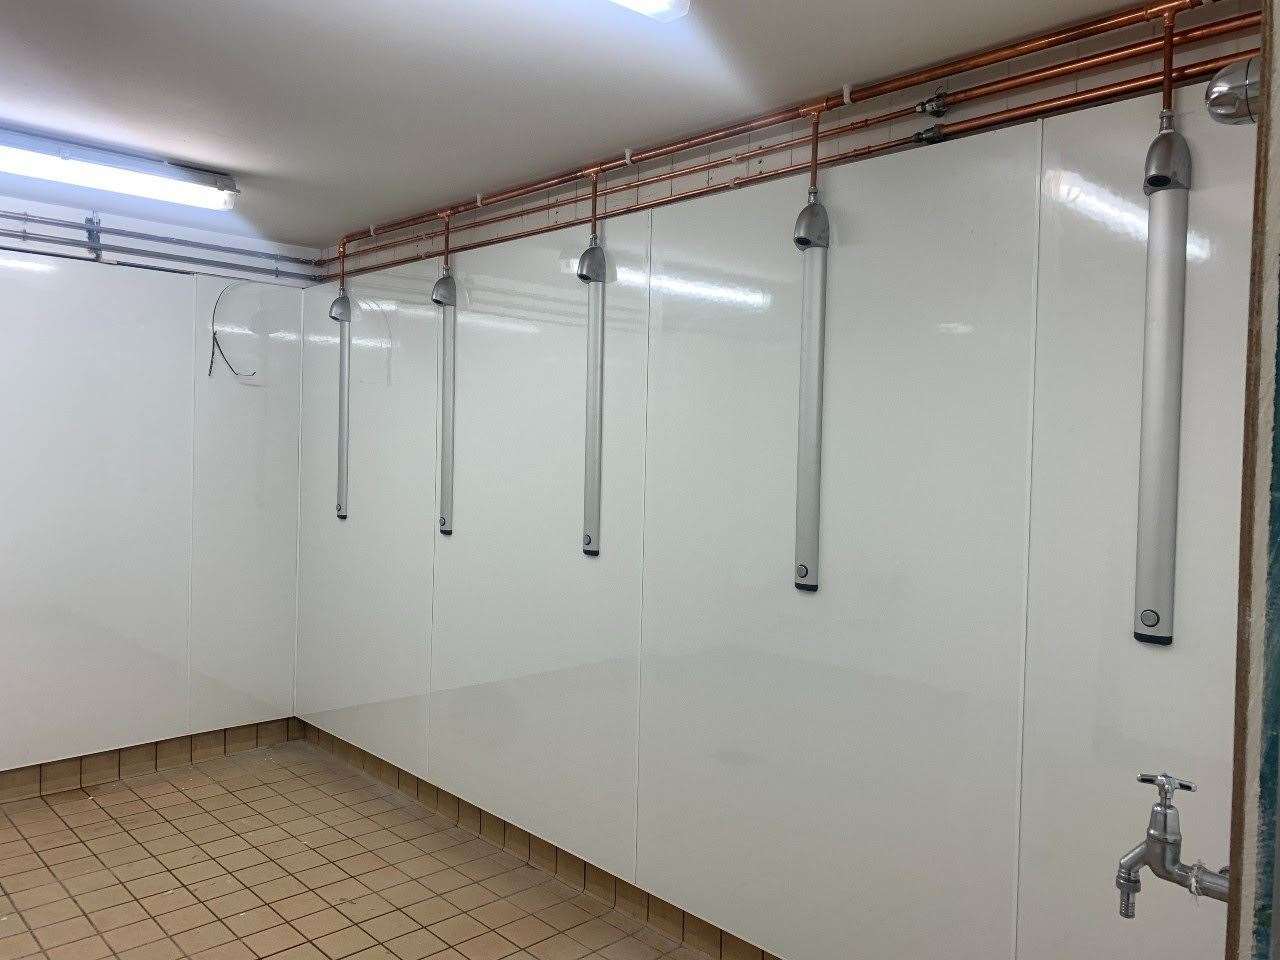 New showers at Mosset Park.